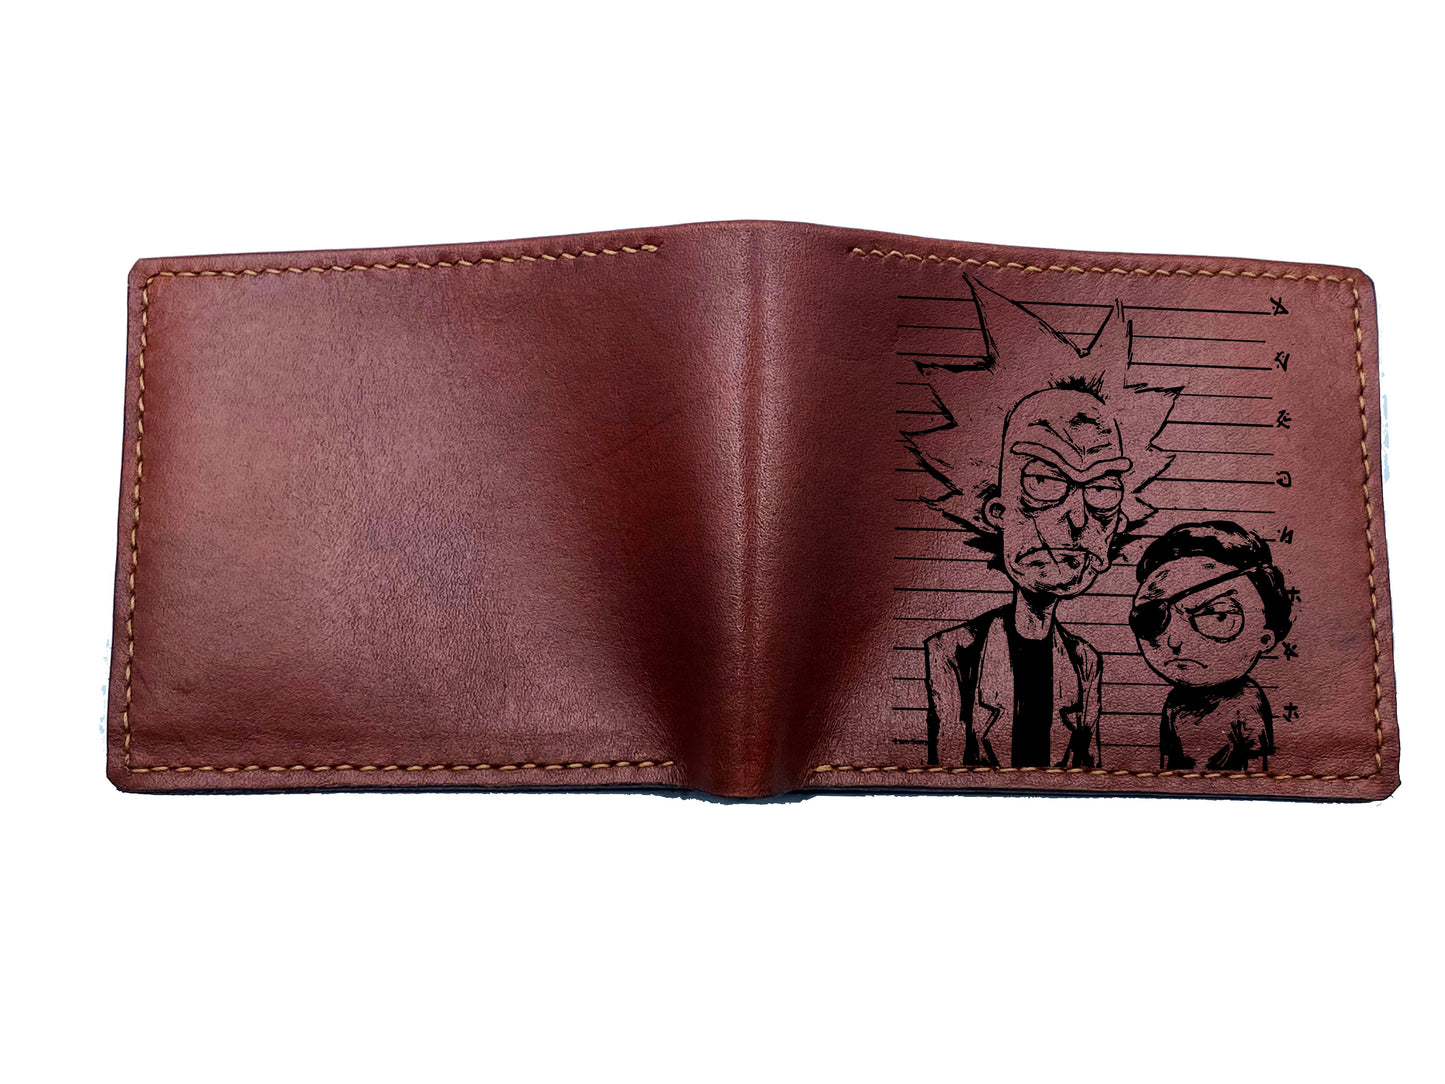 Mayan Corner - Rick and Morty movie series characters leather men's wallet, cartoon art wallet, cool leather gift for him - RM280102